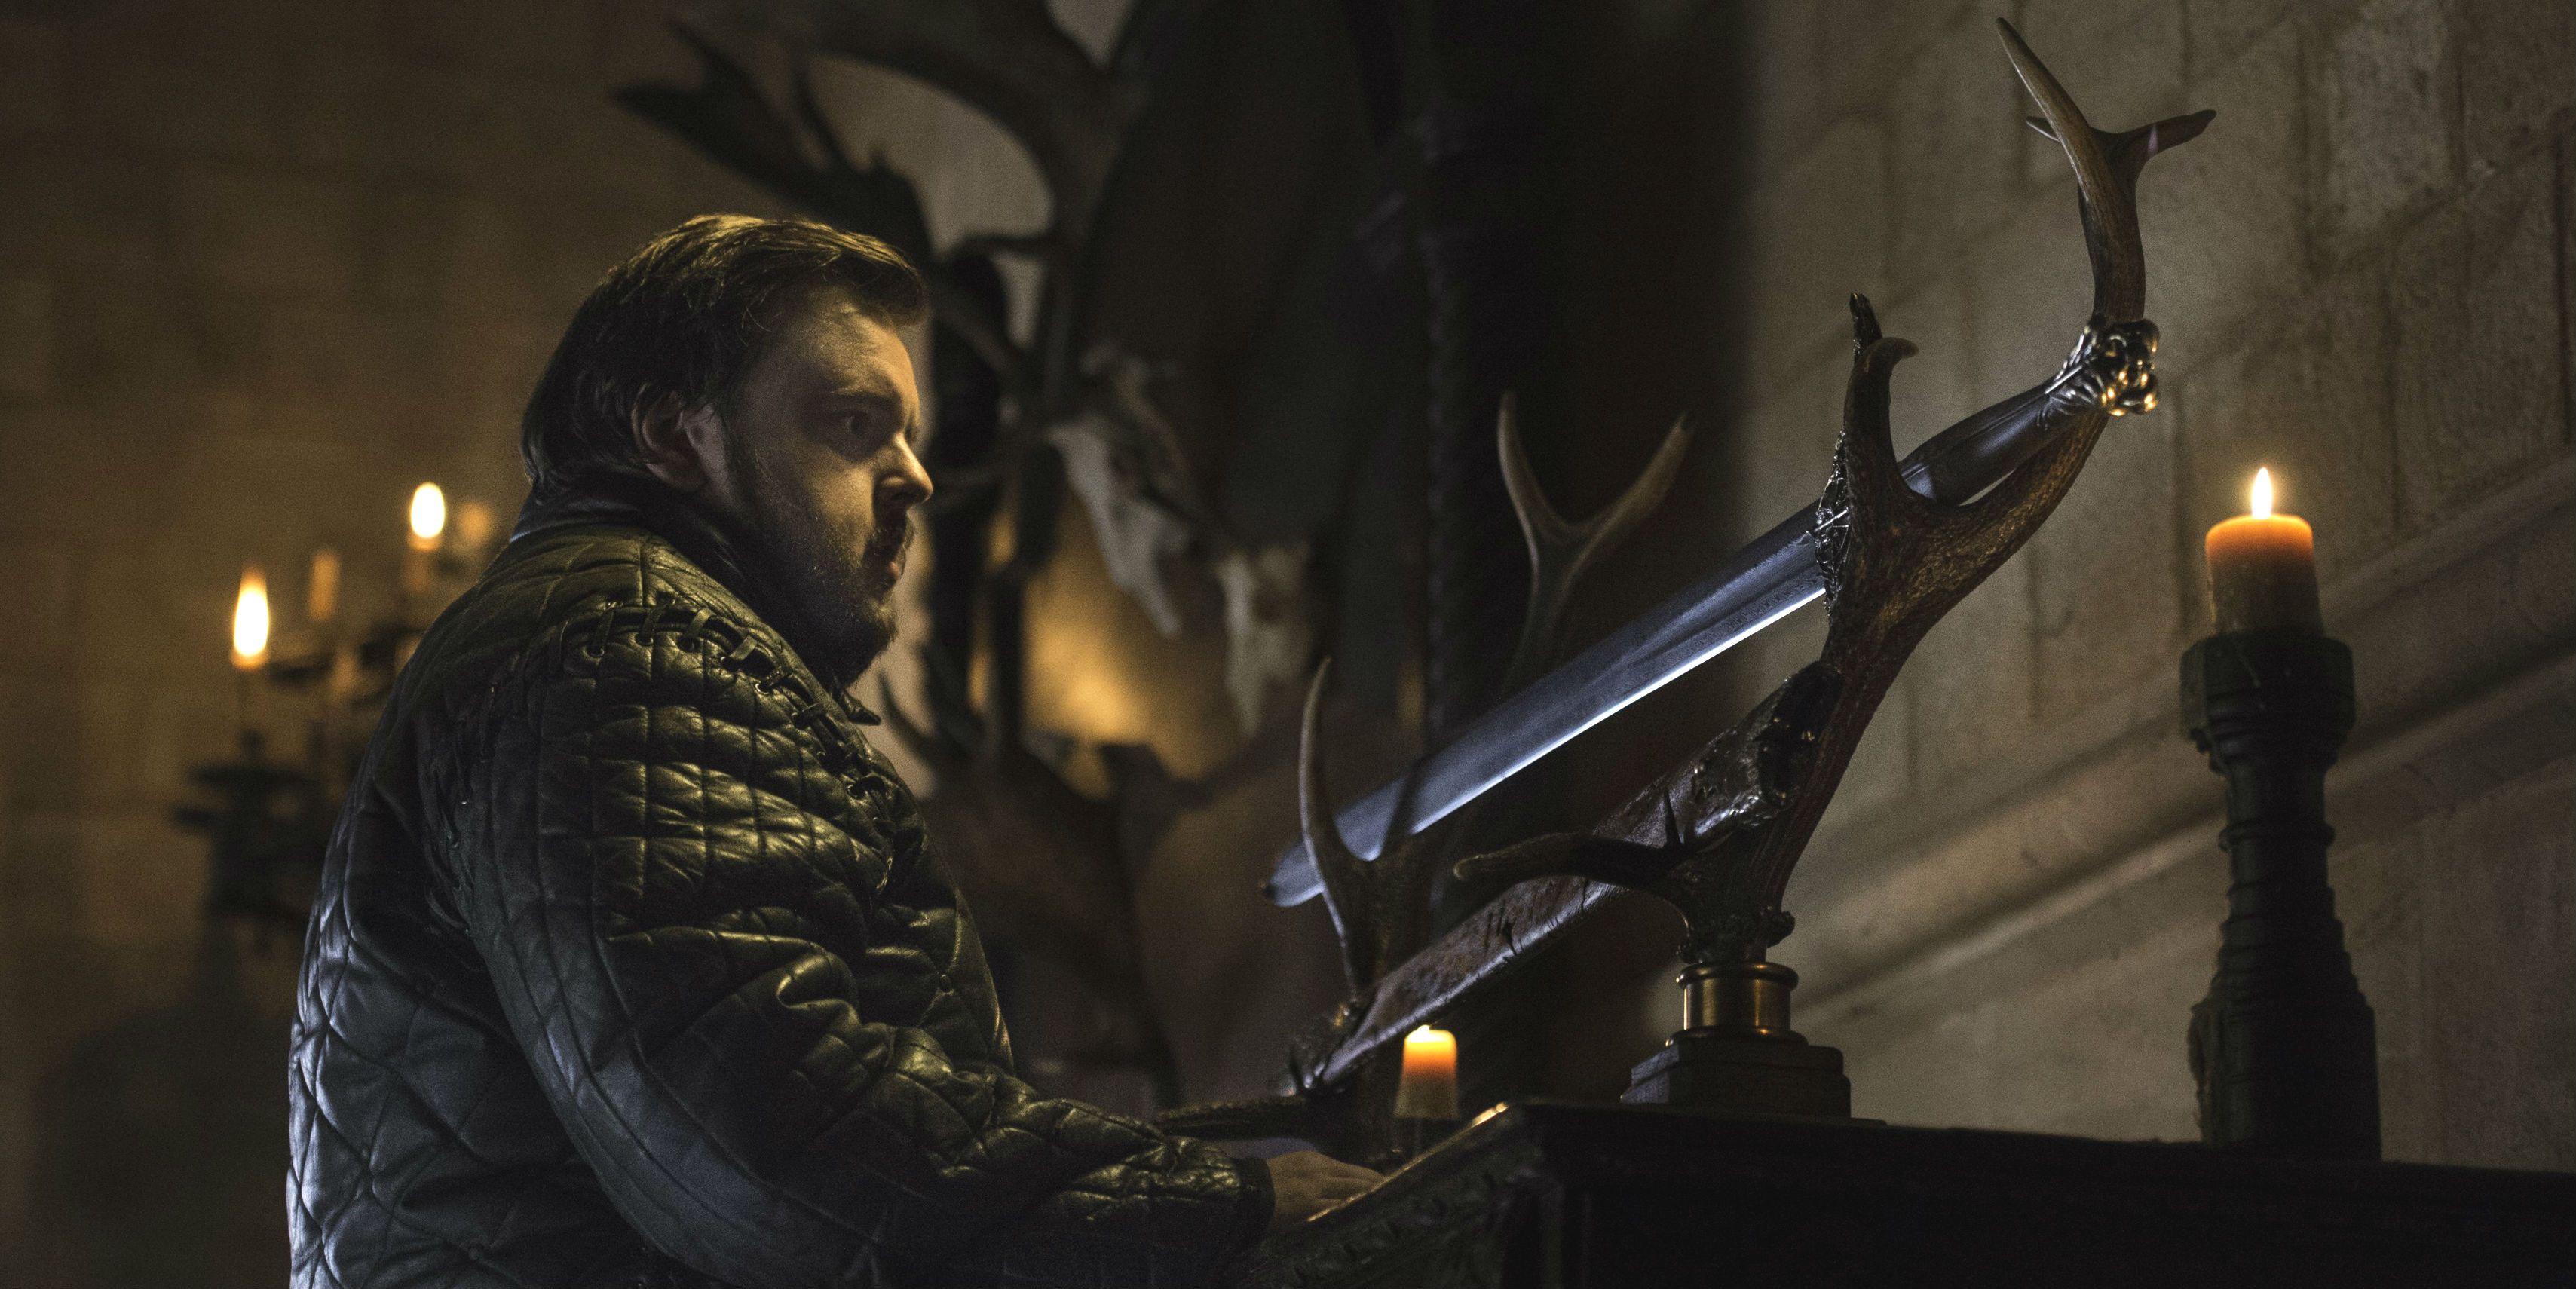 Sam Tarly steals Heartsbane in Game of Thrones.